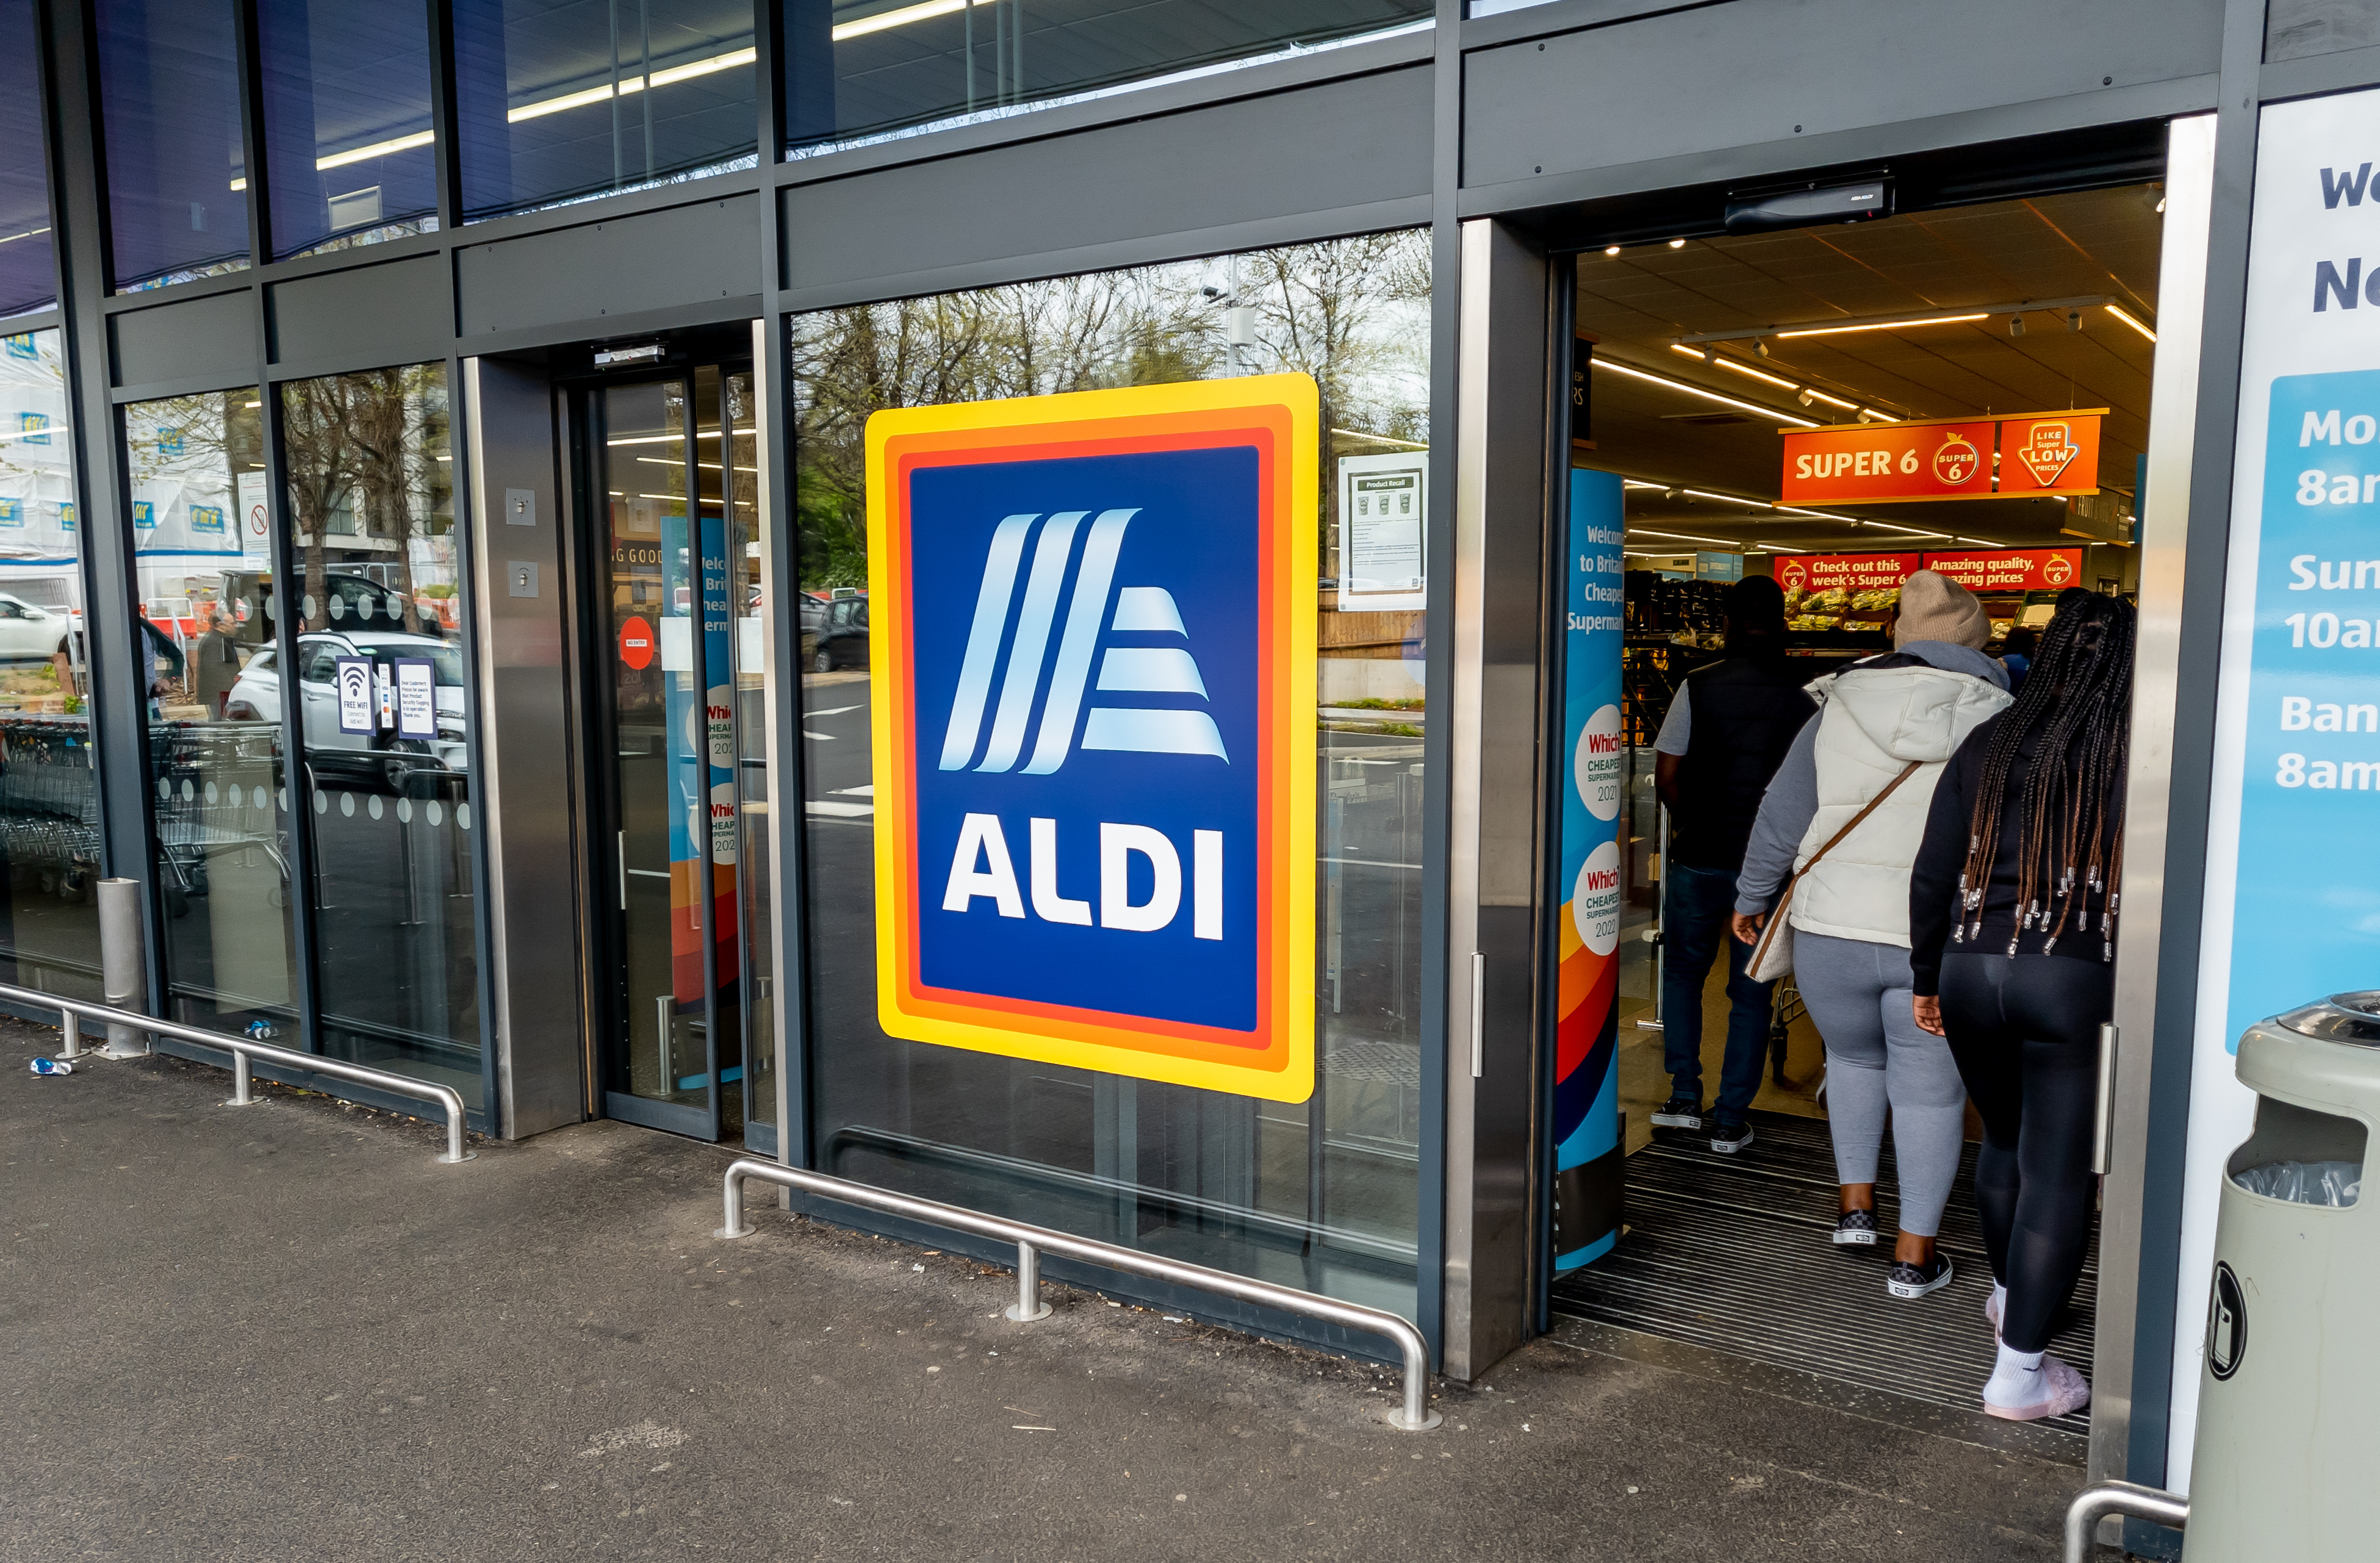 Parents are raving about a brand new buy that has hit the middle aisle in Aldi